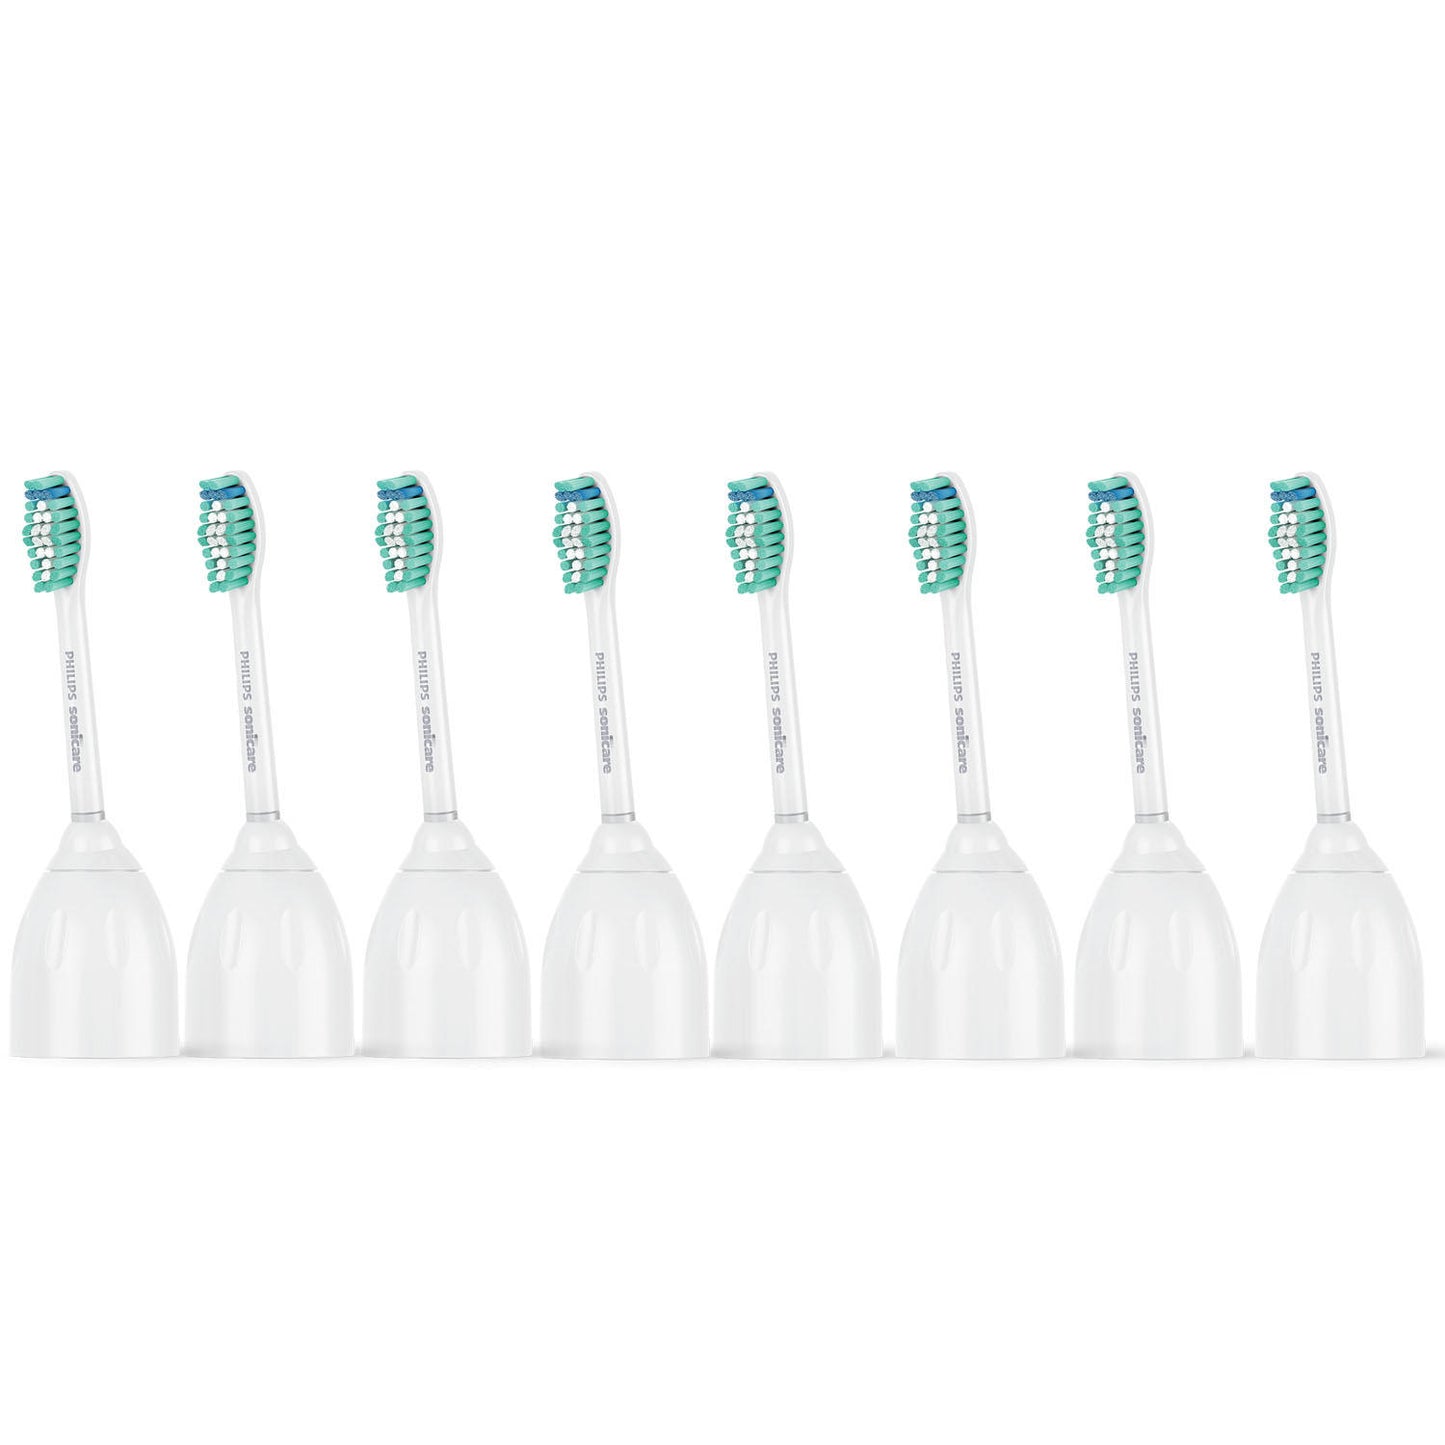 Philips Sonicare E Series Replacement Brush Heads (8 pk.)